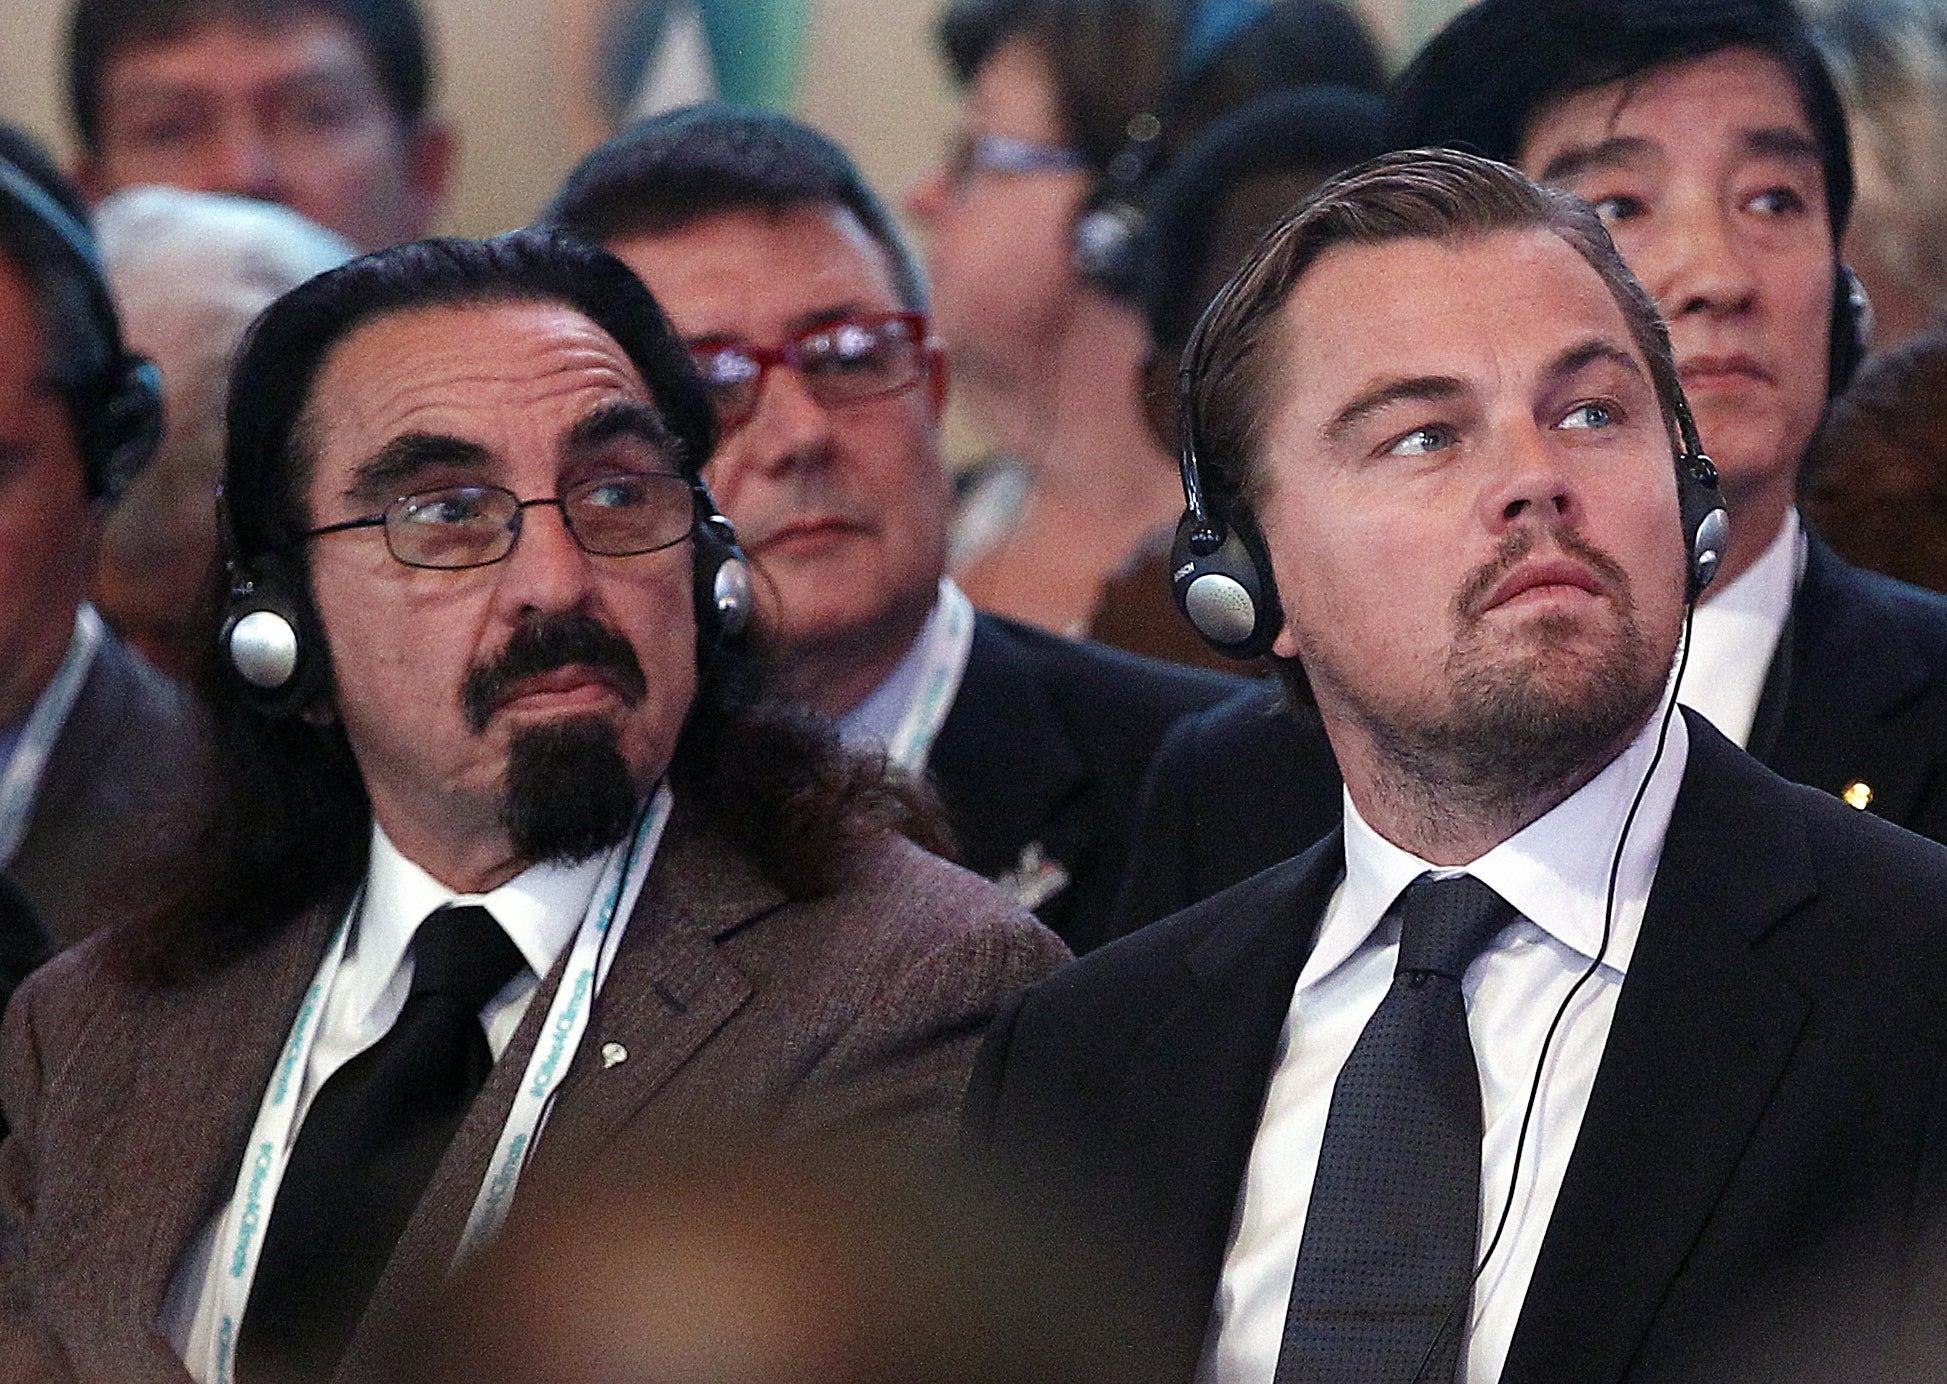 Leo and George sit together at an event